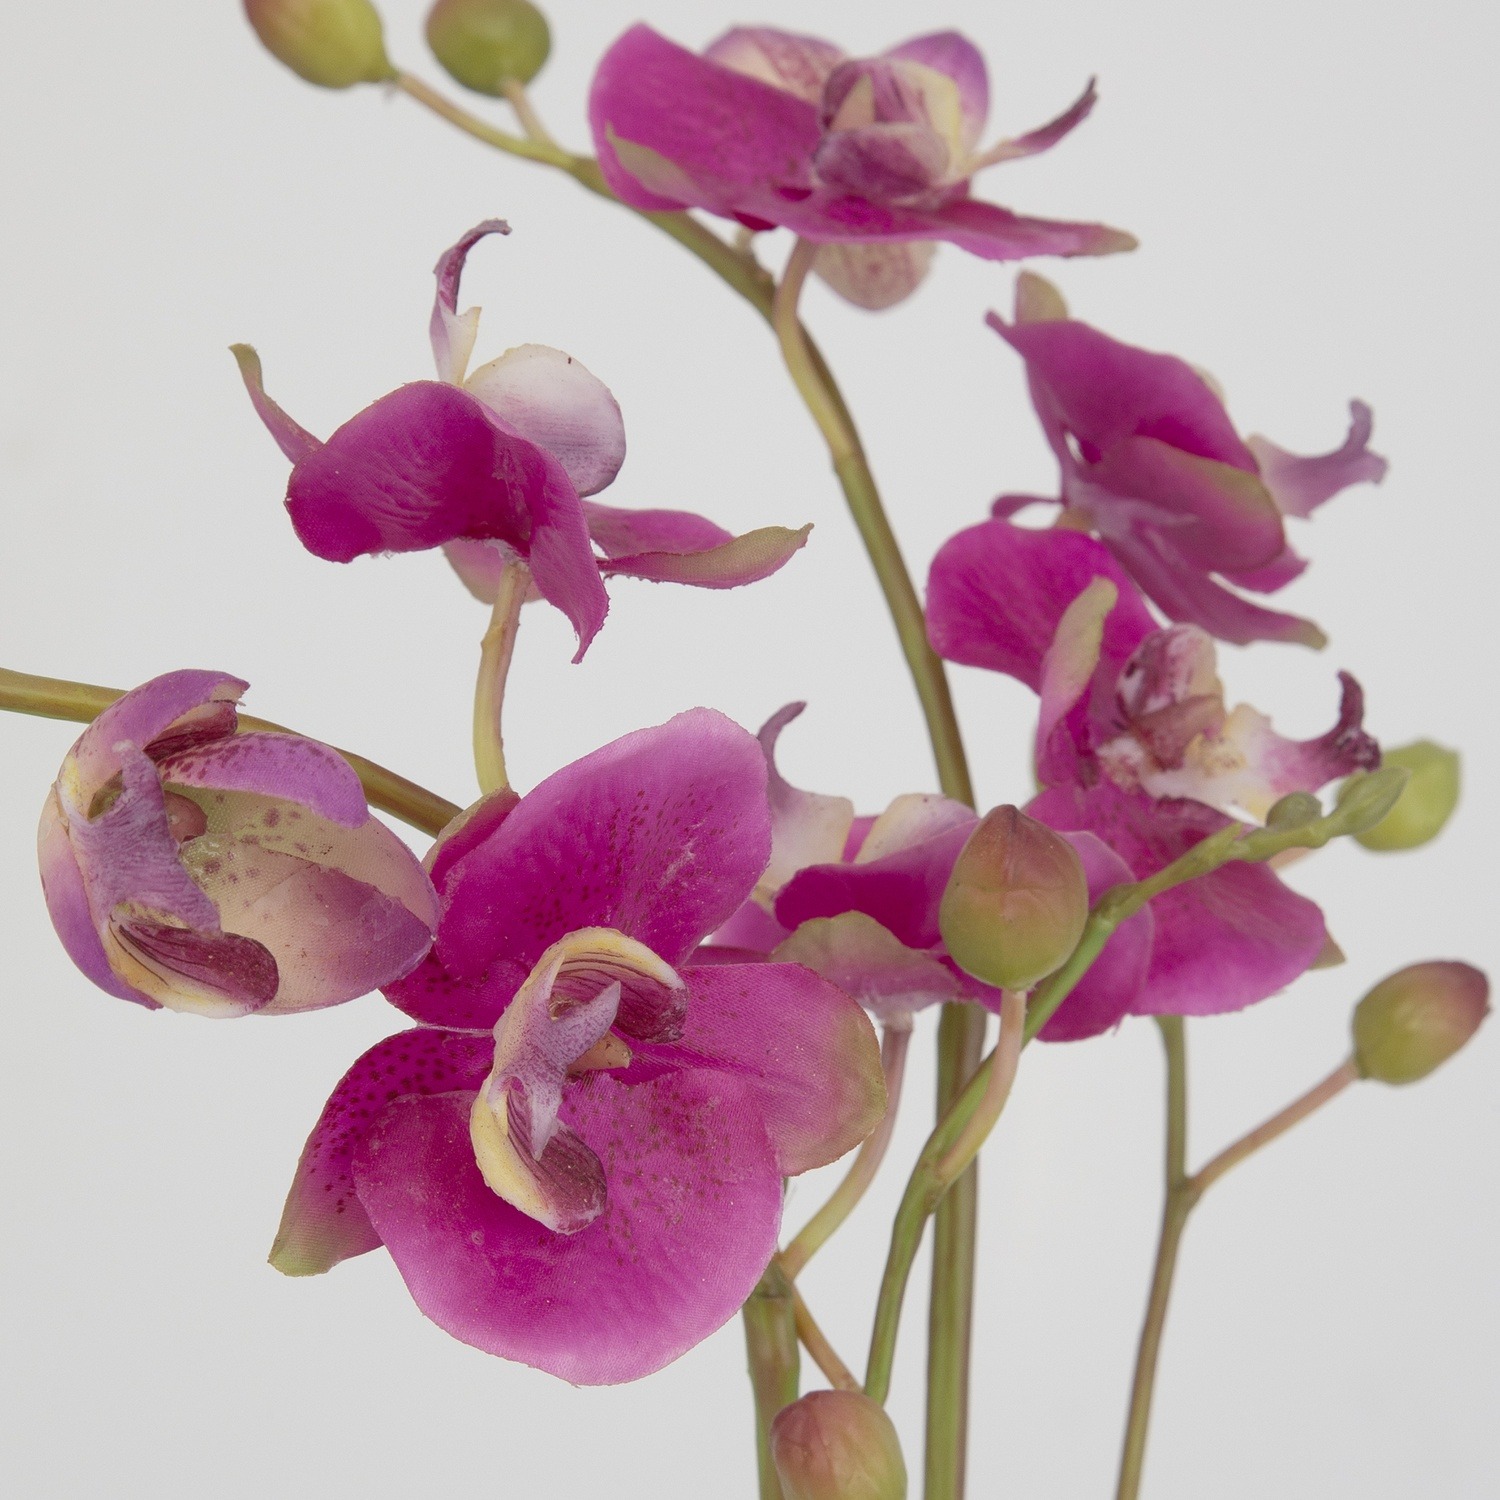 Glory Orchid-Artificial Flowers / Centerpiece